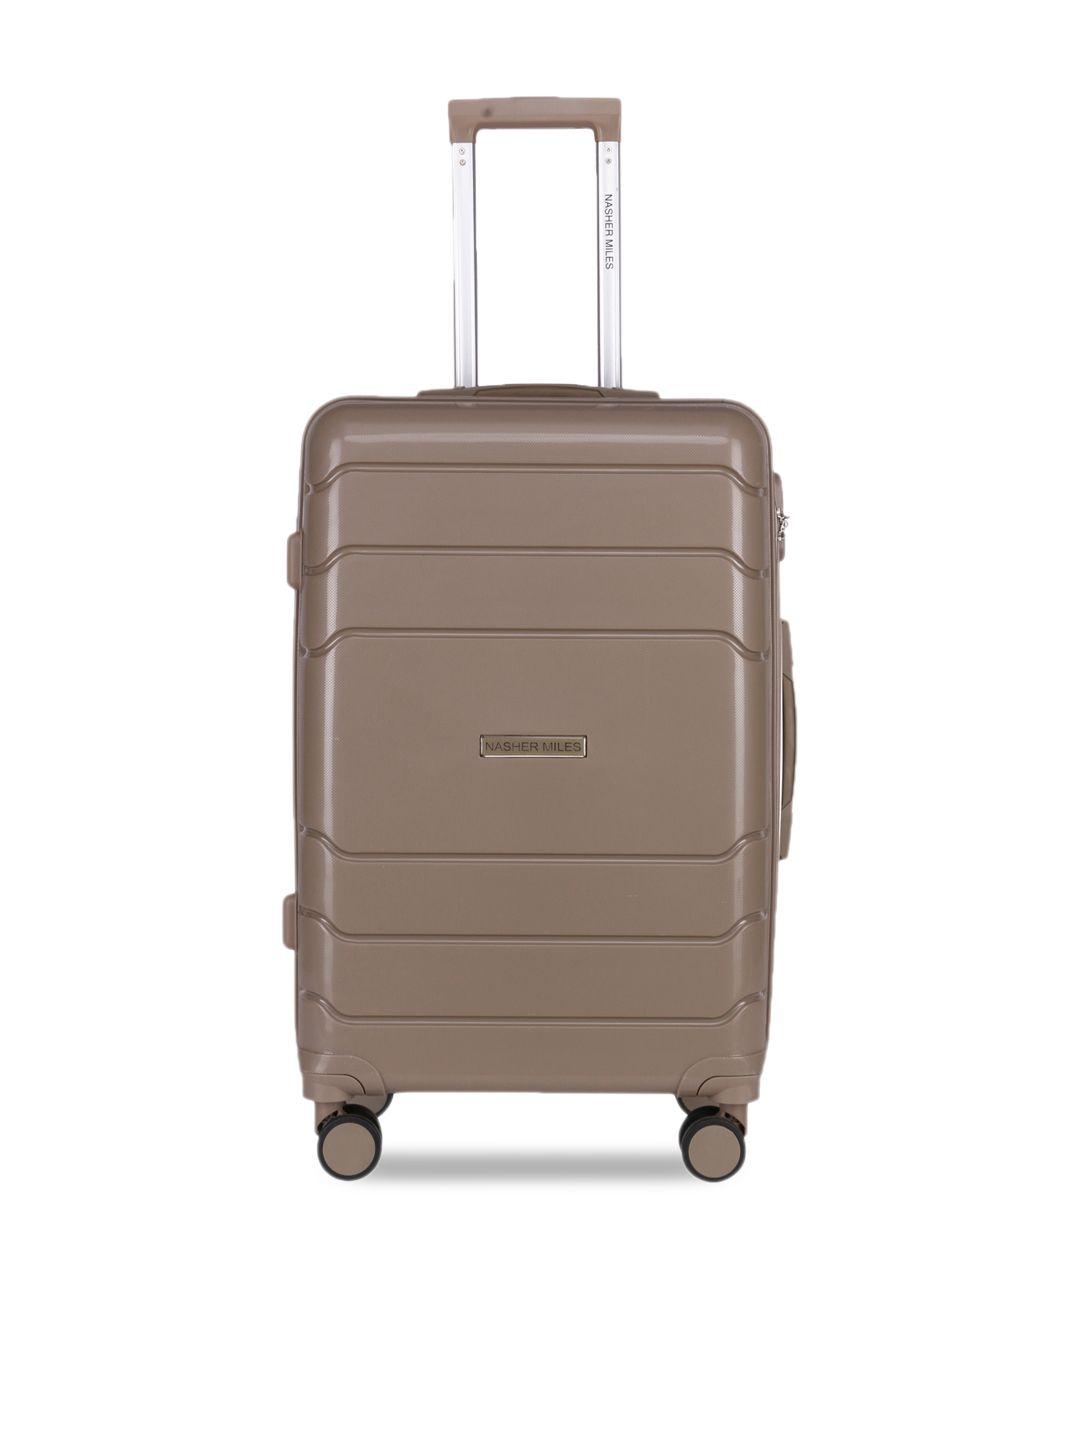 nasher miles unisex taupe solid hard-sided trolley